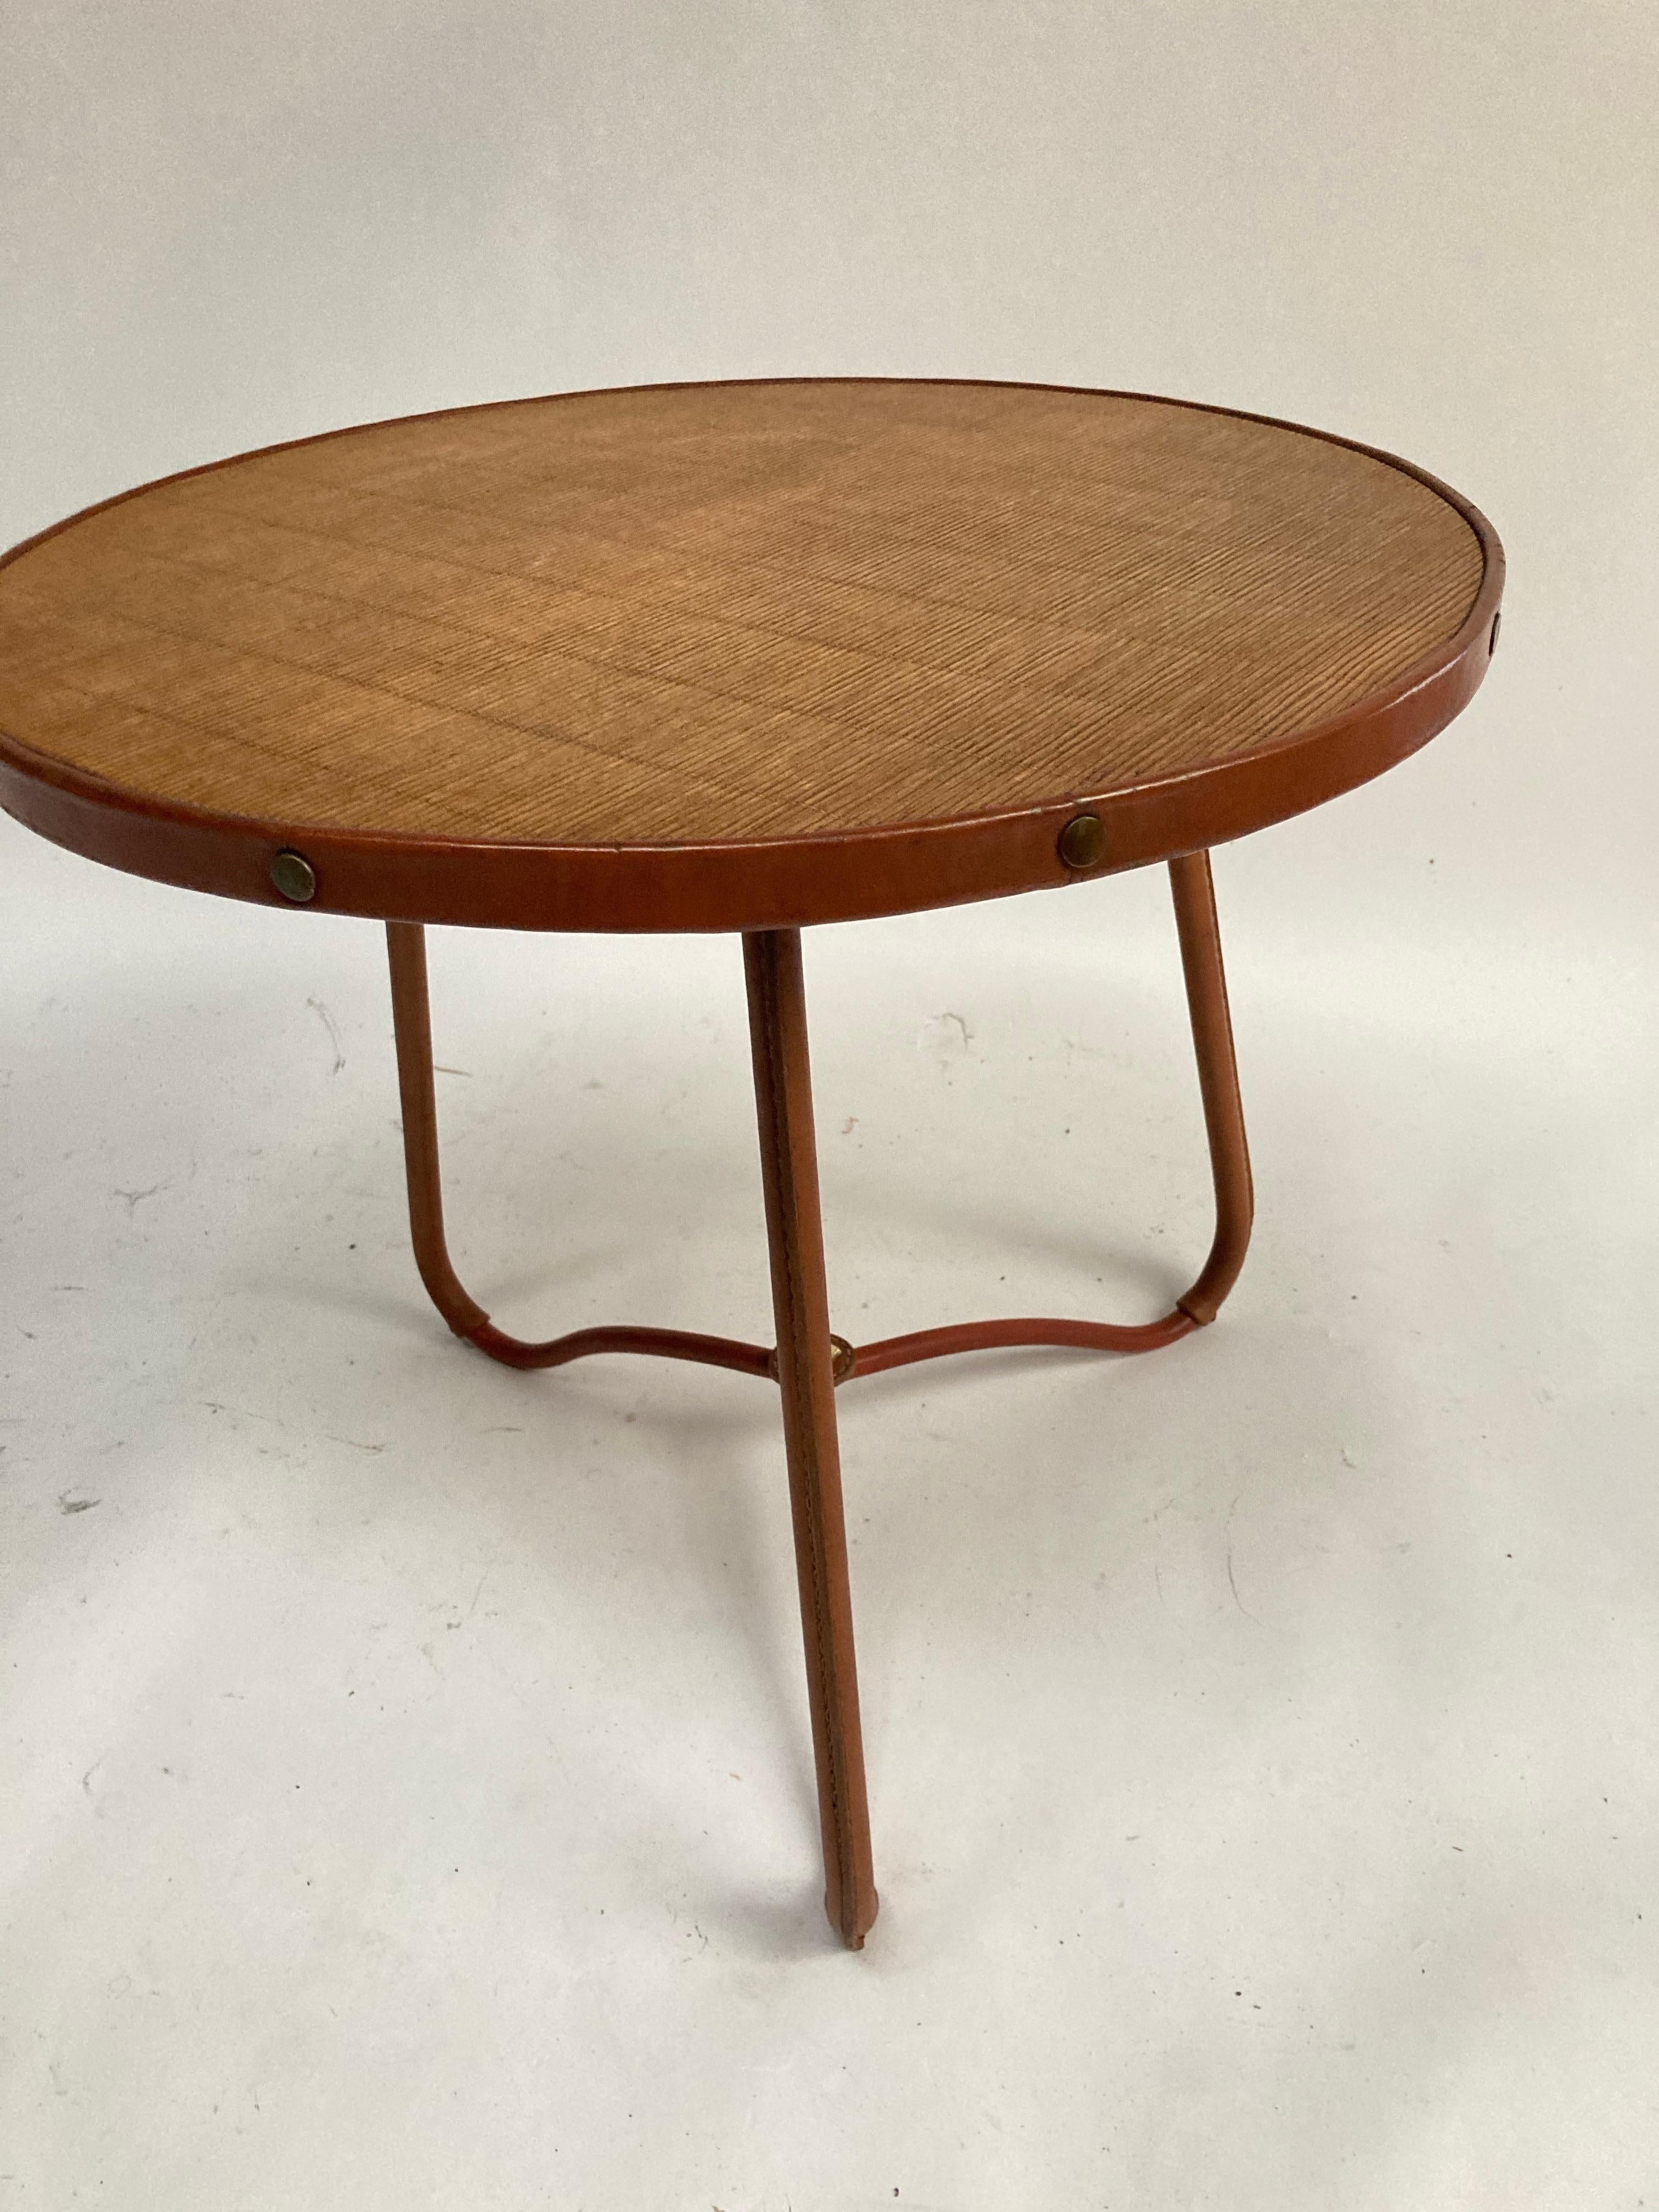 1950's Stitched Leather Table by Jacques Adnet 1